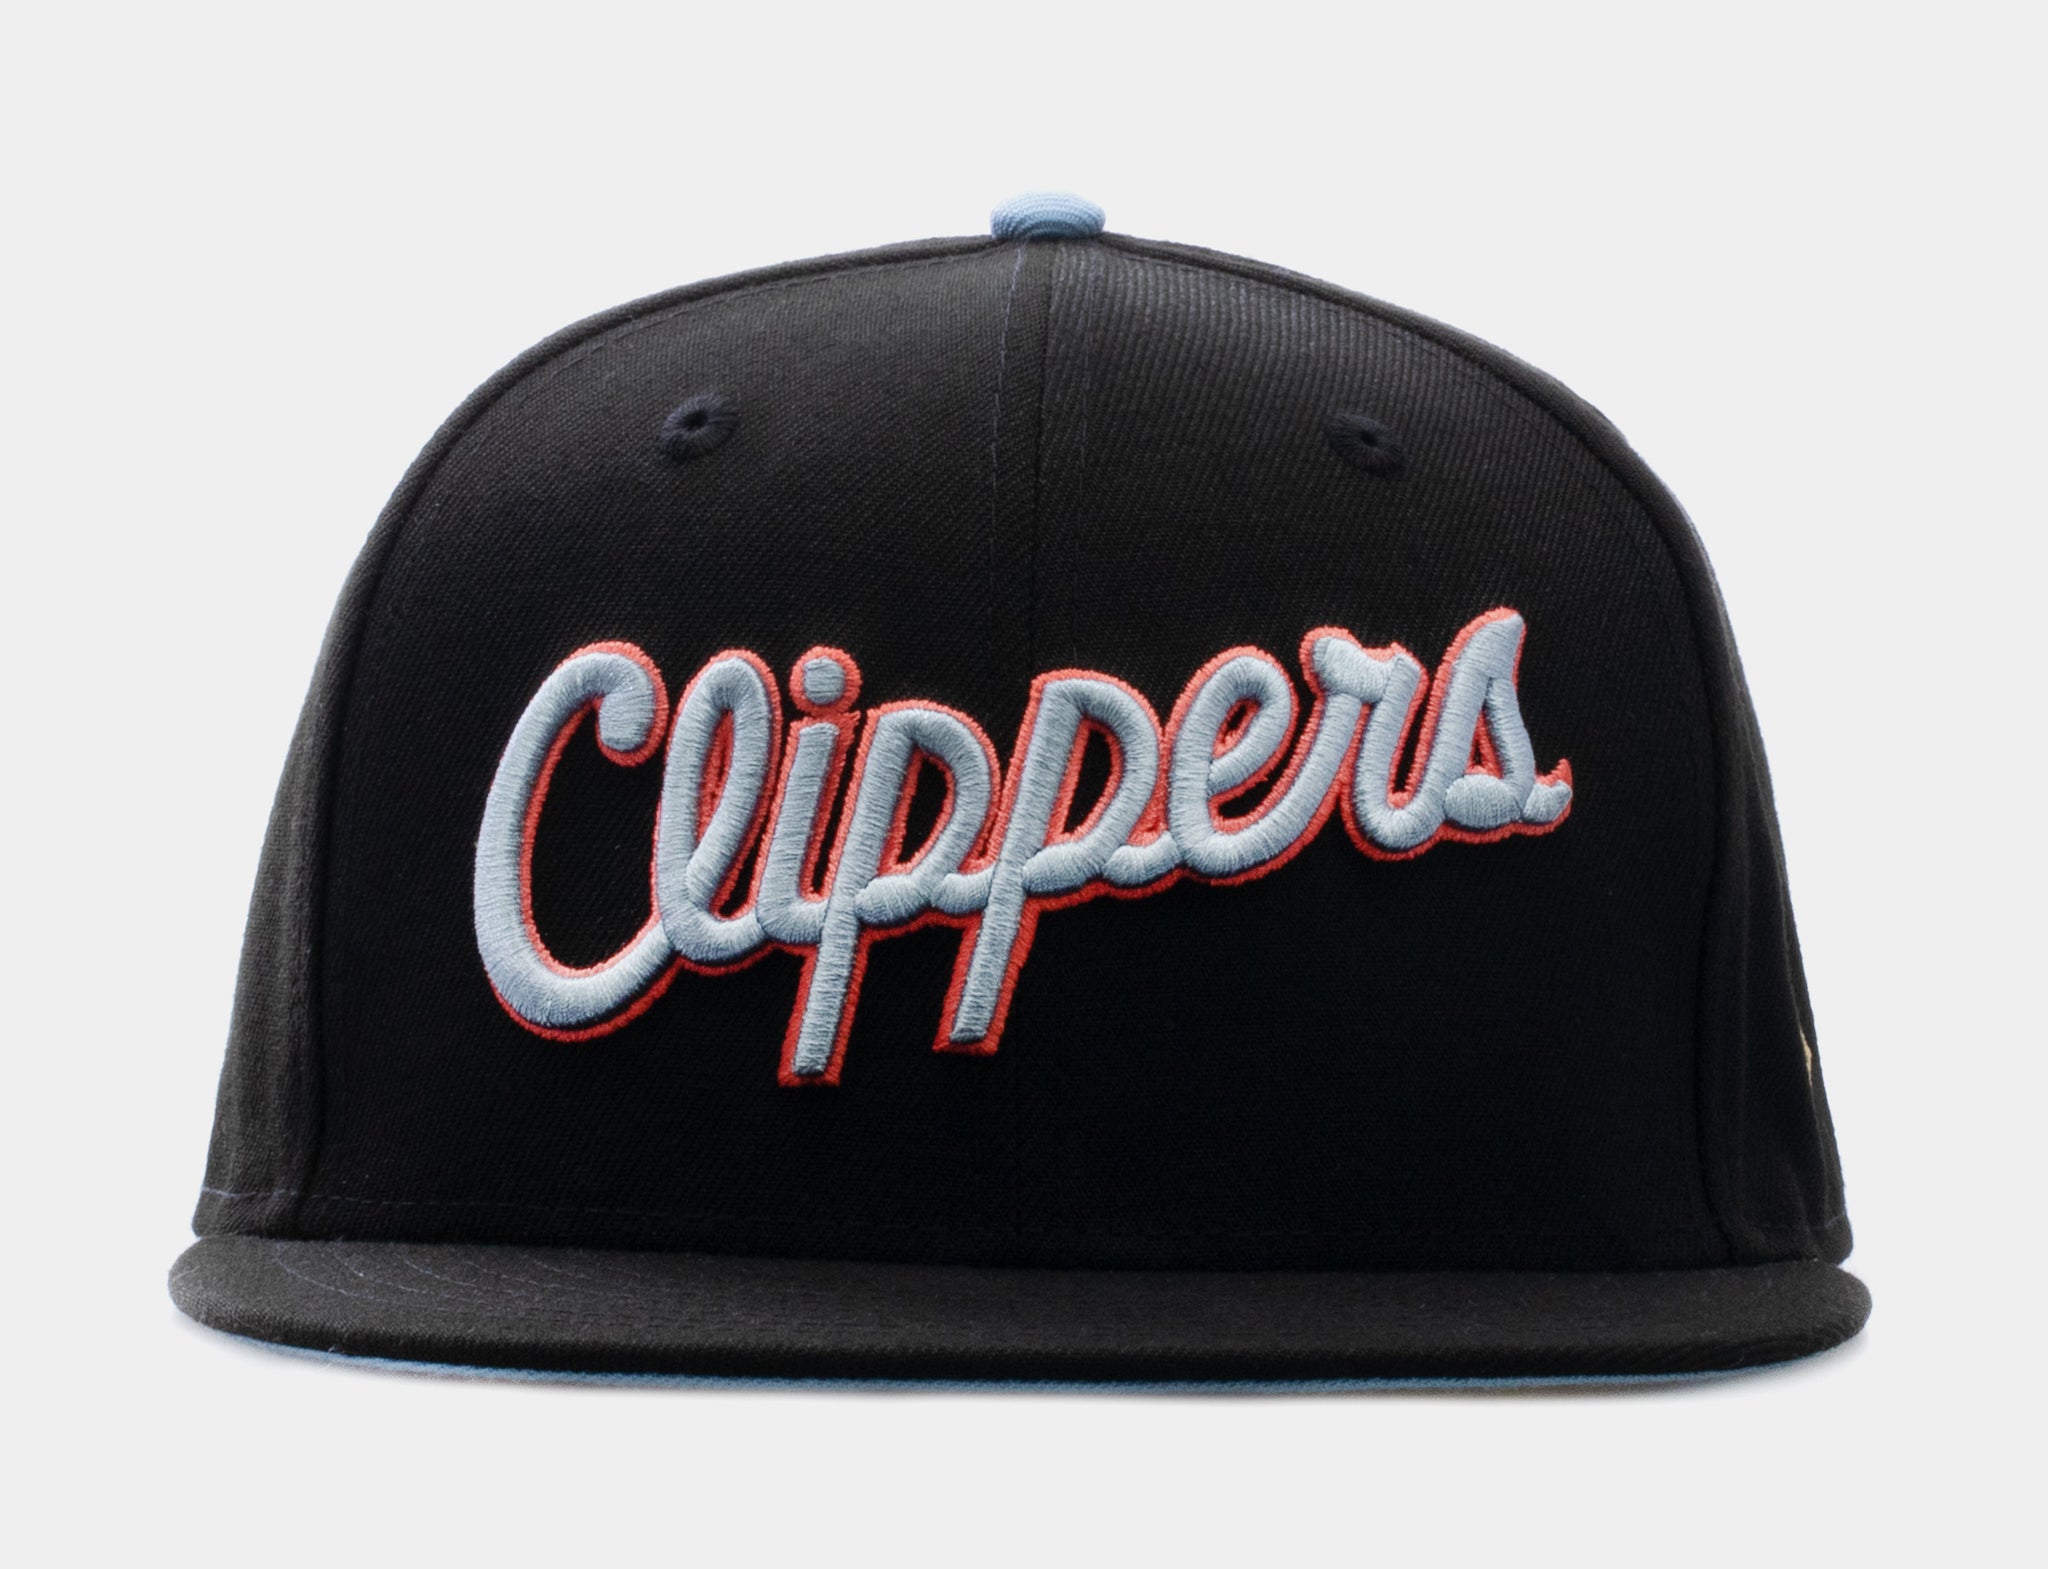 SP x New Era NBA Summer Edition Los Angeles Clippers 59Fifty Fitted Cap  Mens Hat (Black/Blue)